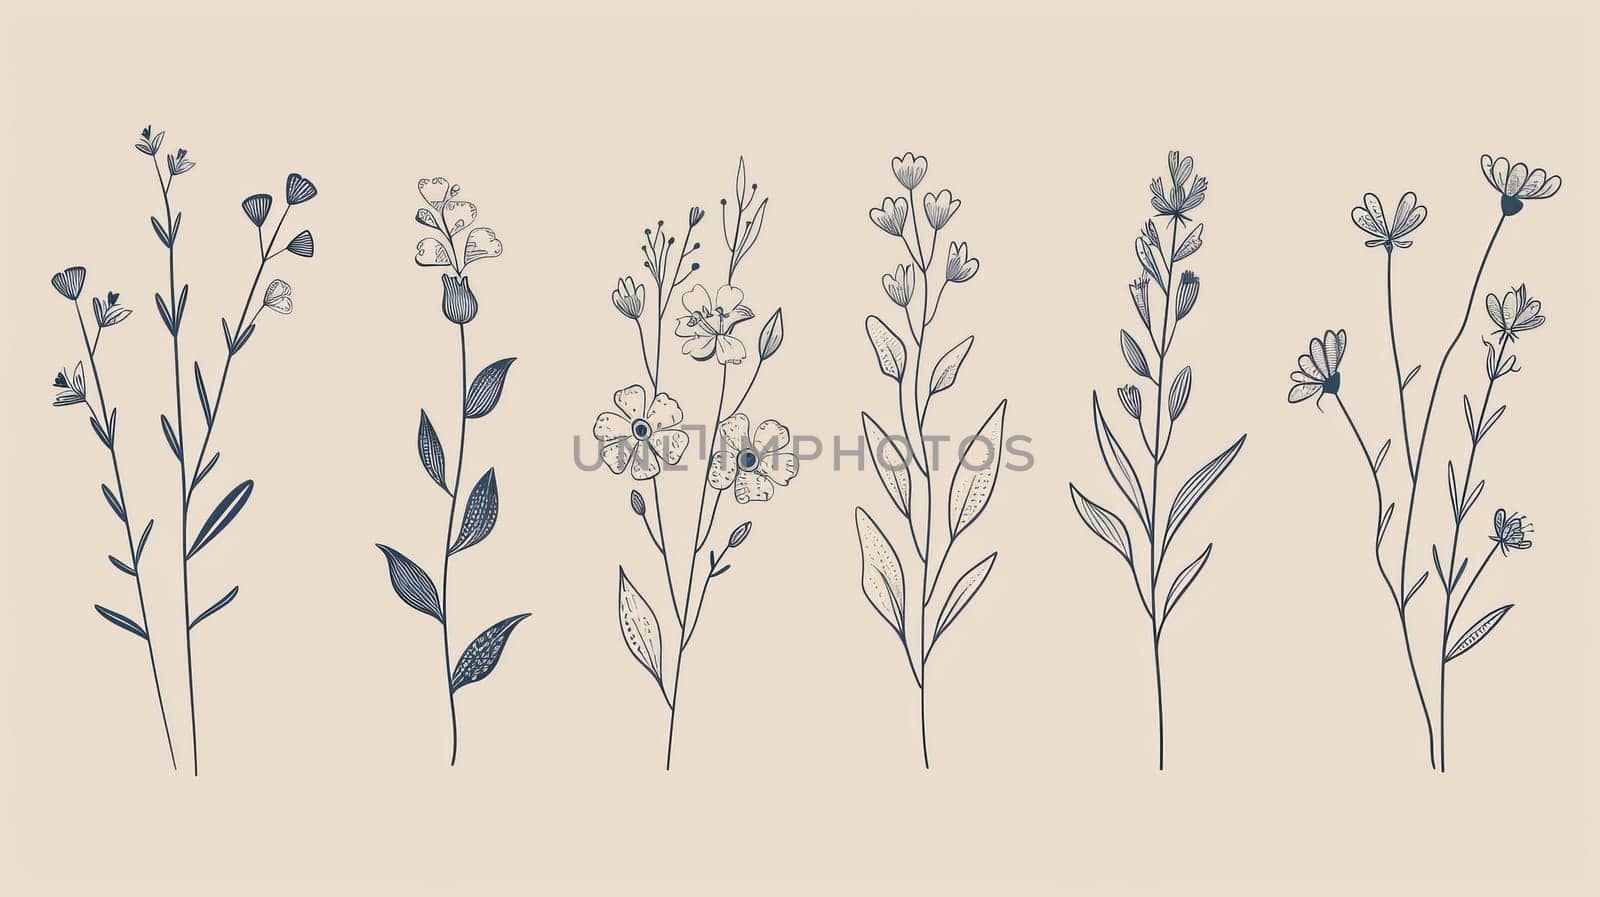 An elegant collection of botanically drawn line art elements. This design is perfect for logos, greeting cards, wedding invitations, and decor.